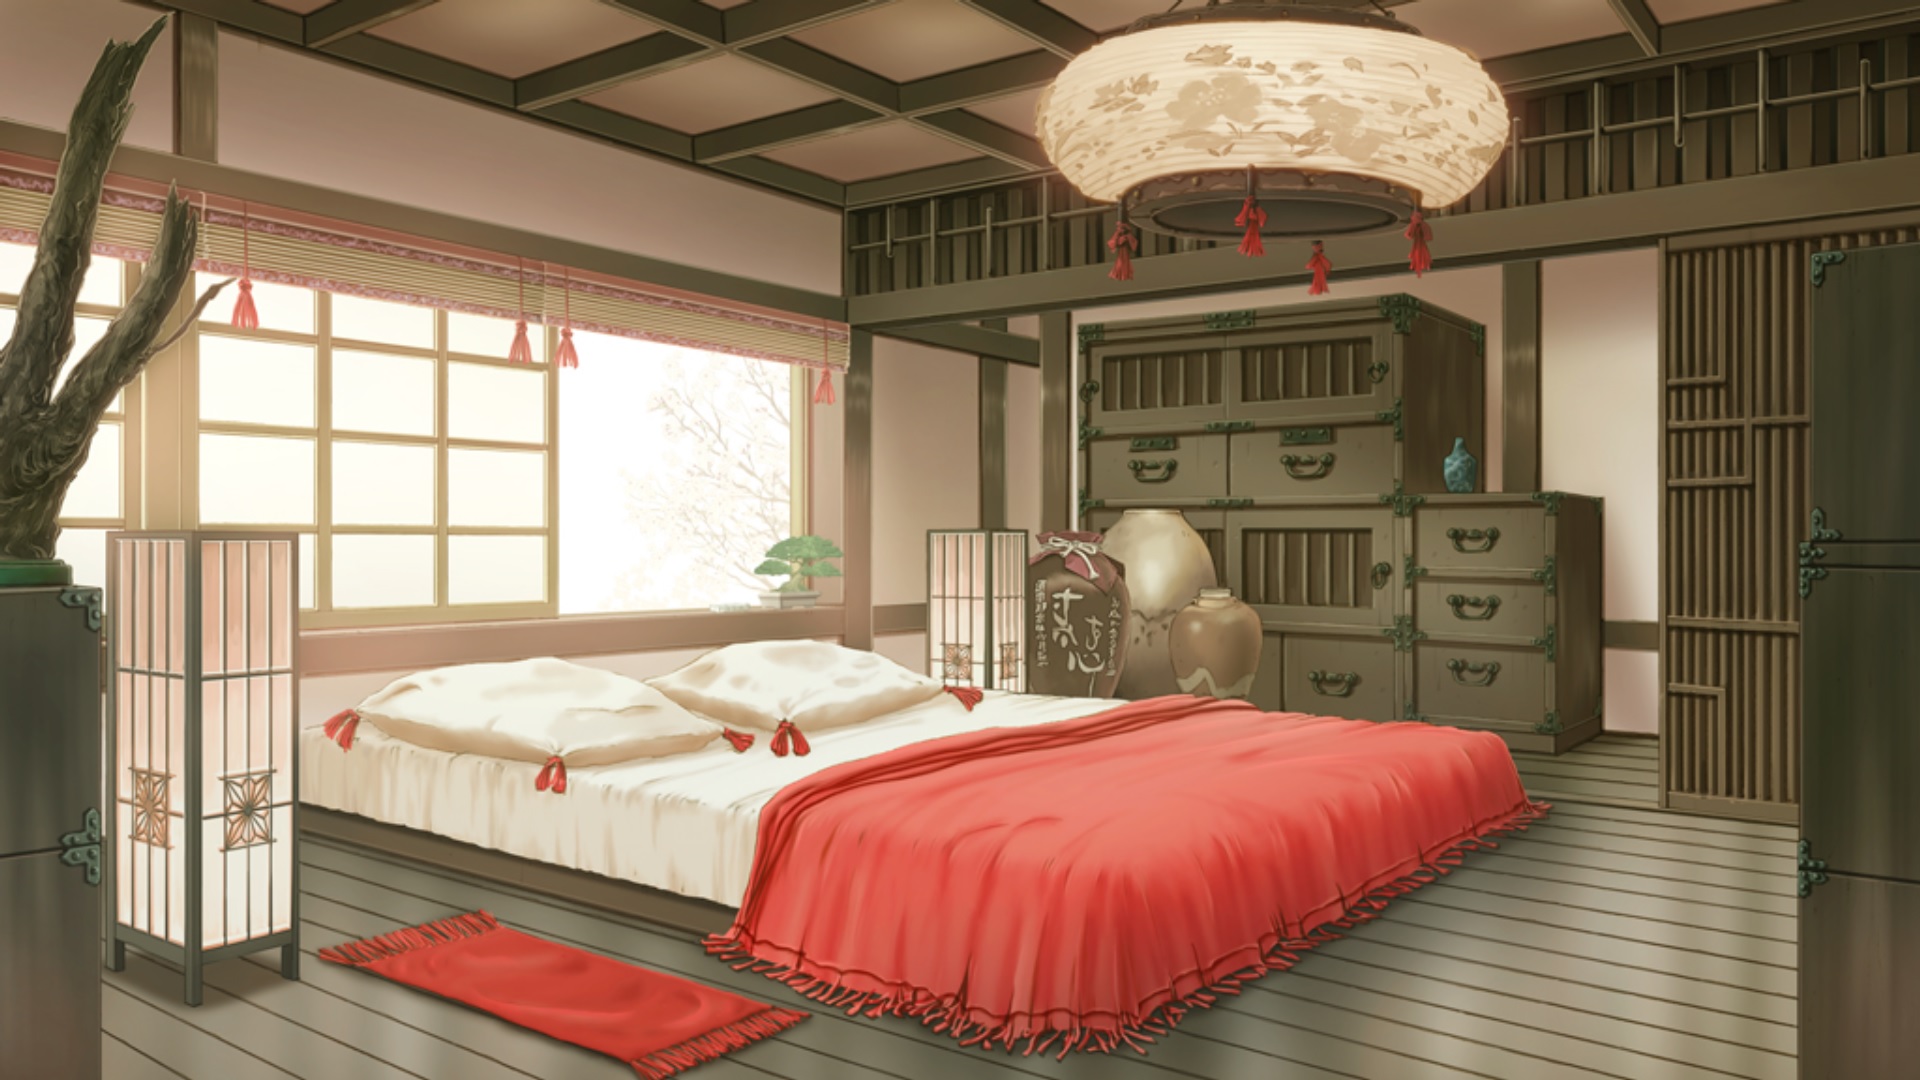 Rooms in anime - 68 photo